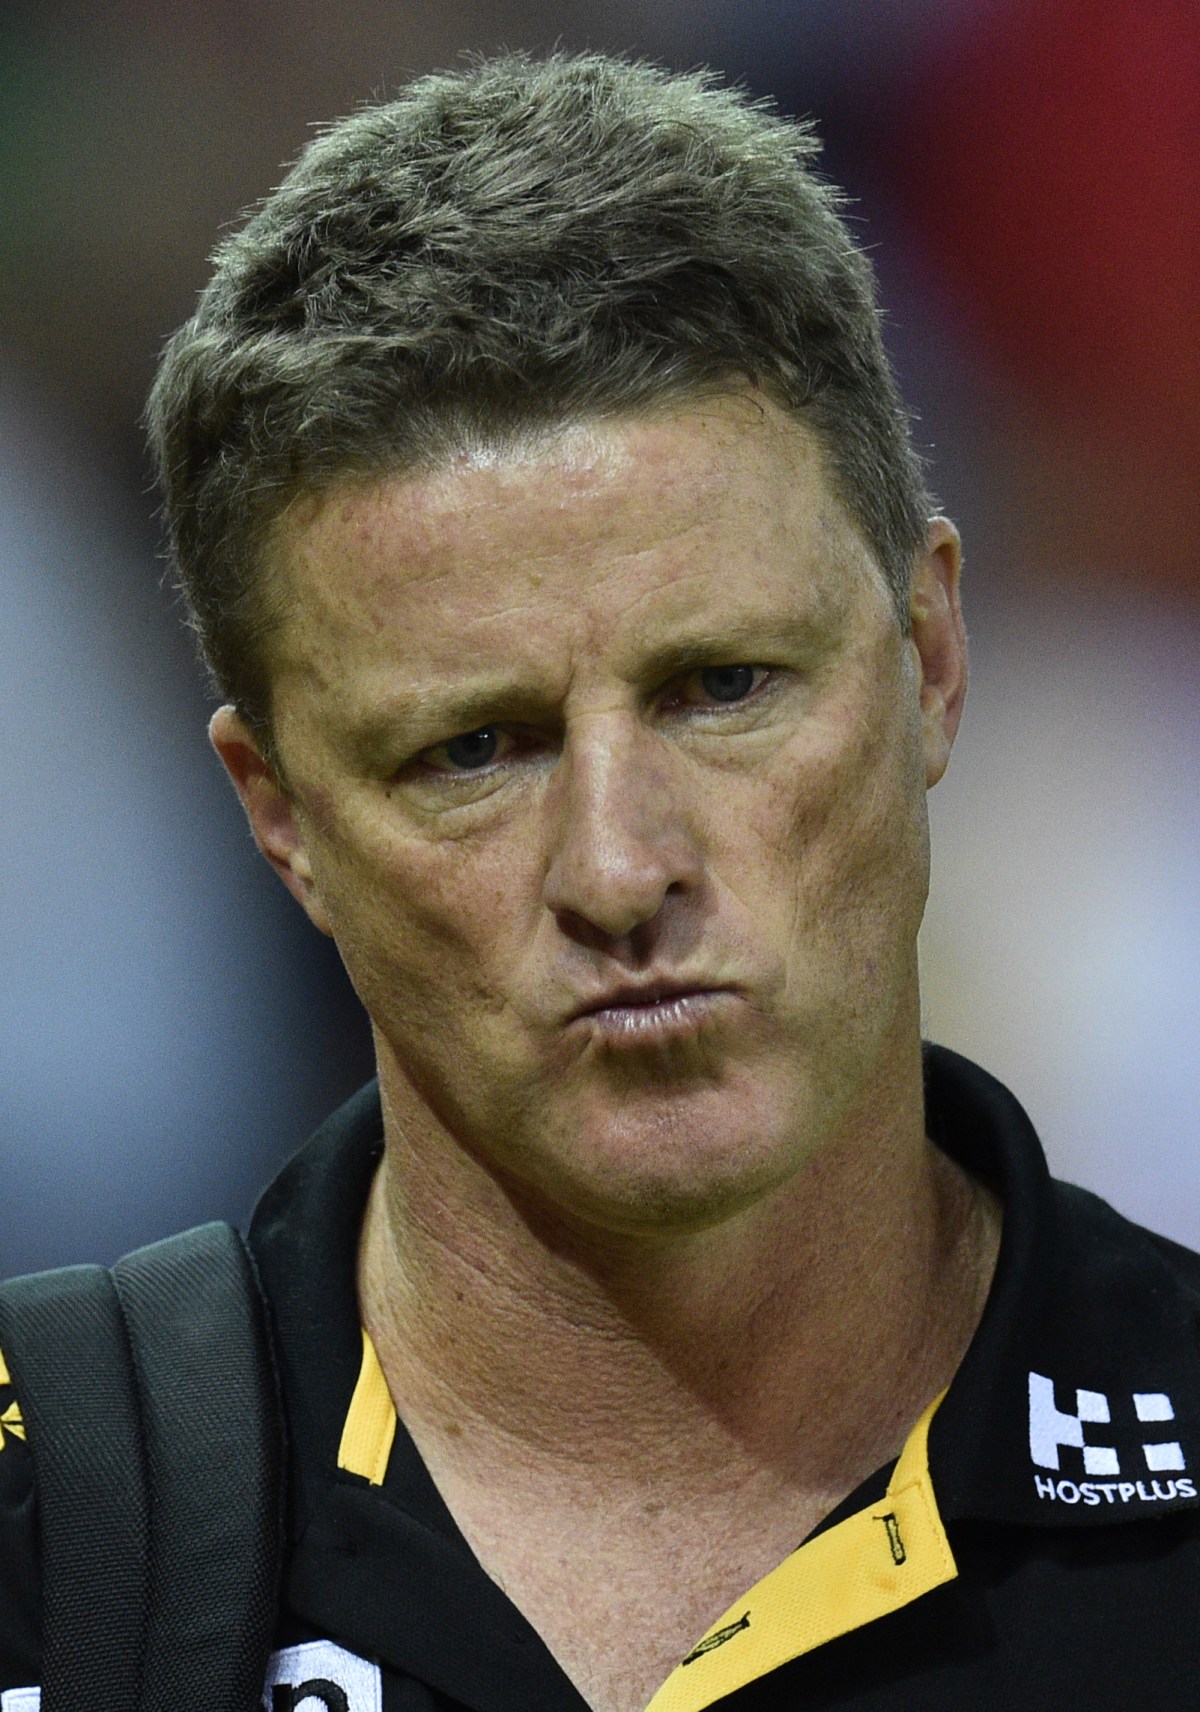 Coach of the Tigers Damien Hardwick makes his way to the change rooms after being defeated by the Adelaide Crows during the round 3 AFL match between the Richmond Tigers and the Adelaide Crows at Etihad Stadium in Melbourne, Saturday, April 9, 2016. (AAP Image/Julian Smith) NO ARCHIVING, EDITORIAL USE ONLY